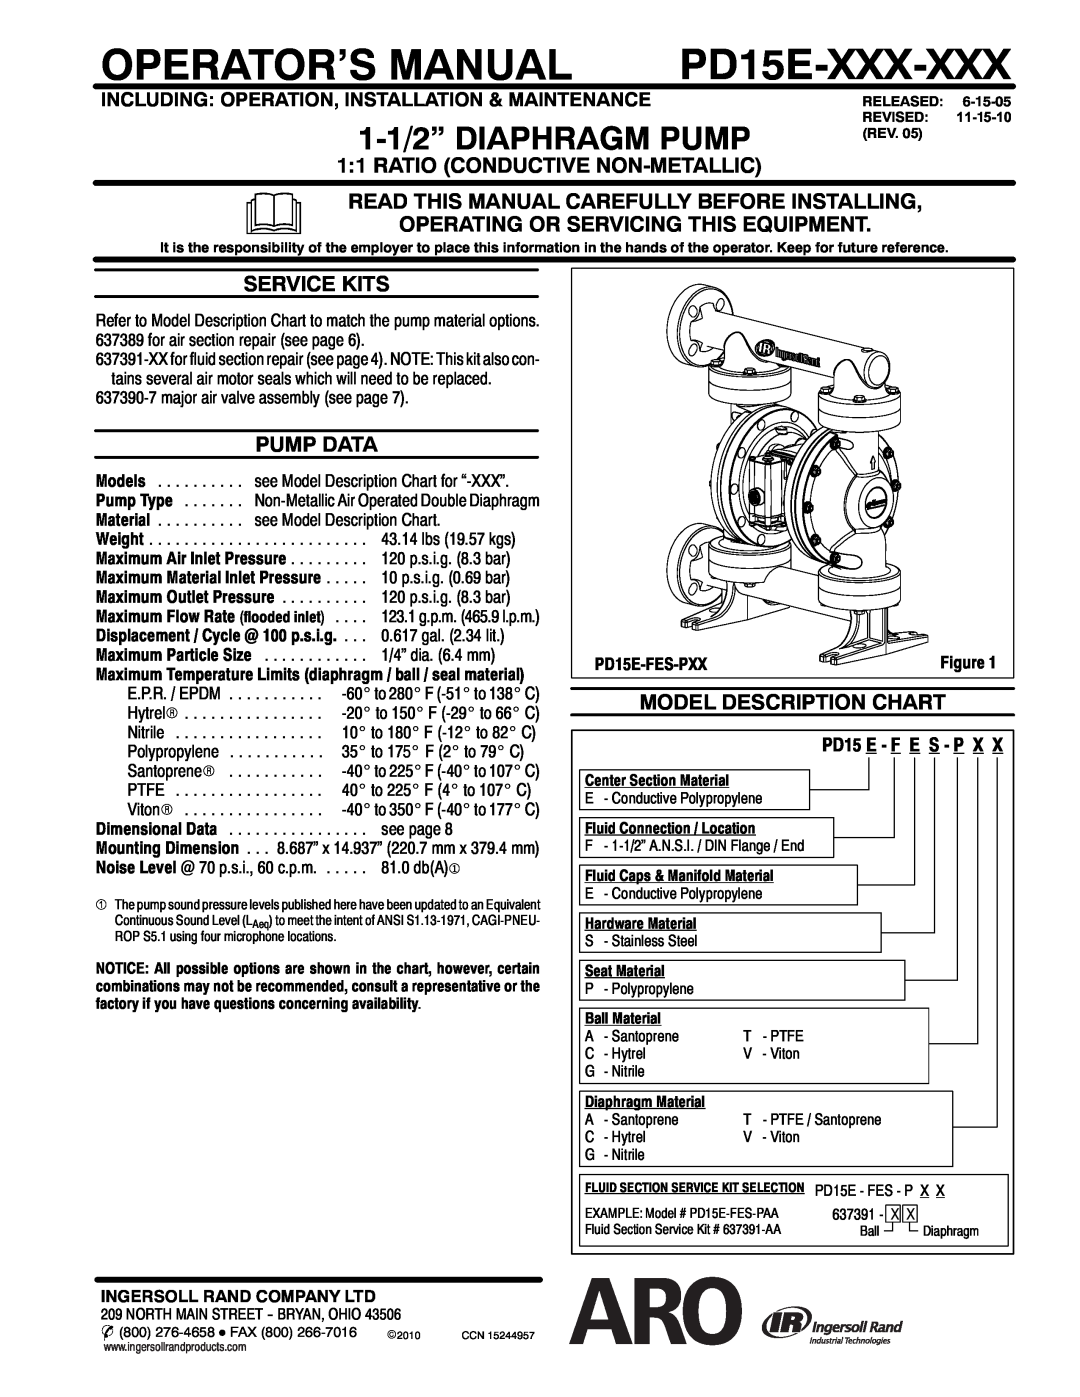 Ingersoll-Rand PD15E-FES-PXX manual 1 1 RATIO CONDUCTIVE NON-METALLIC, Read This Manual Carefully Before Installing 